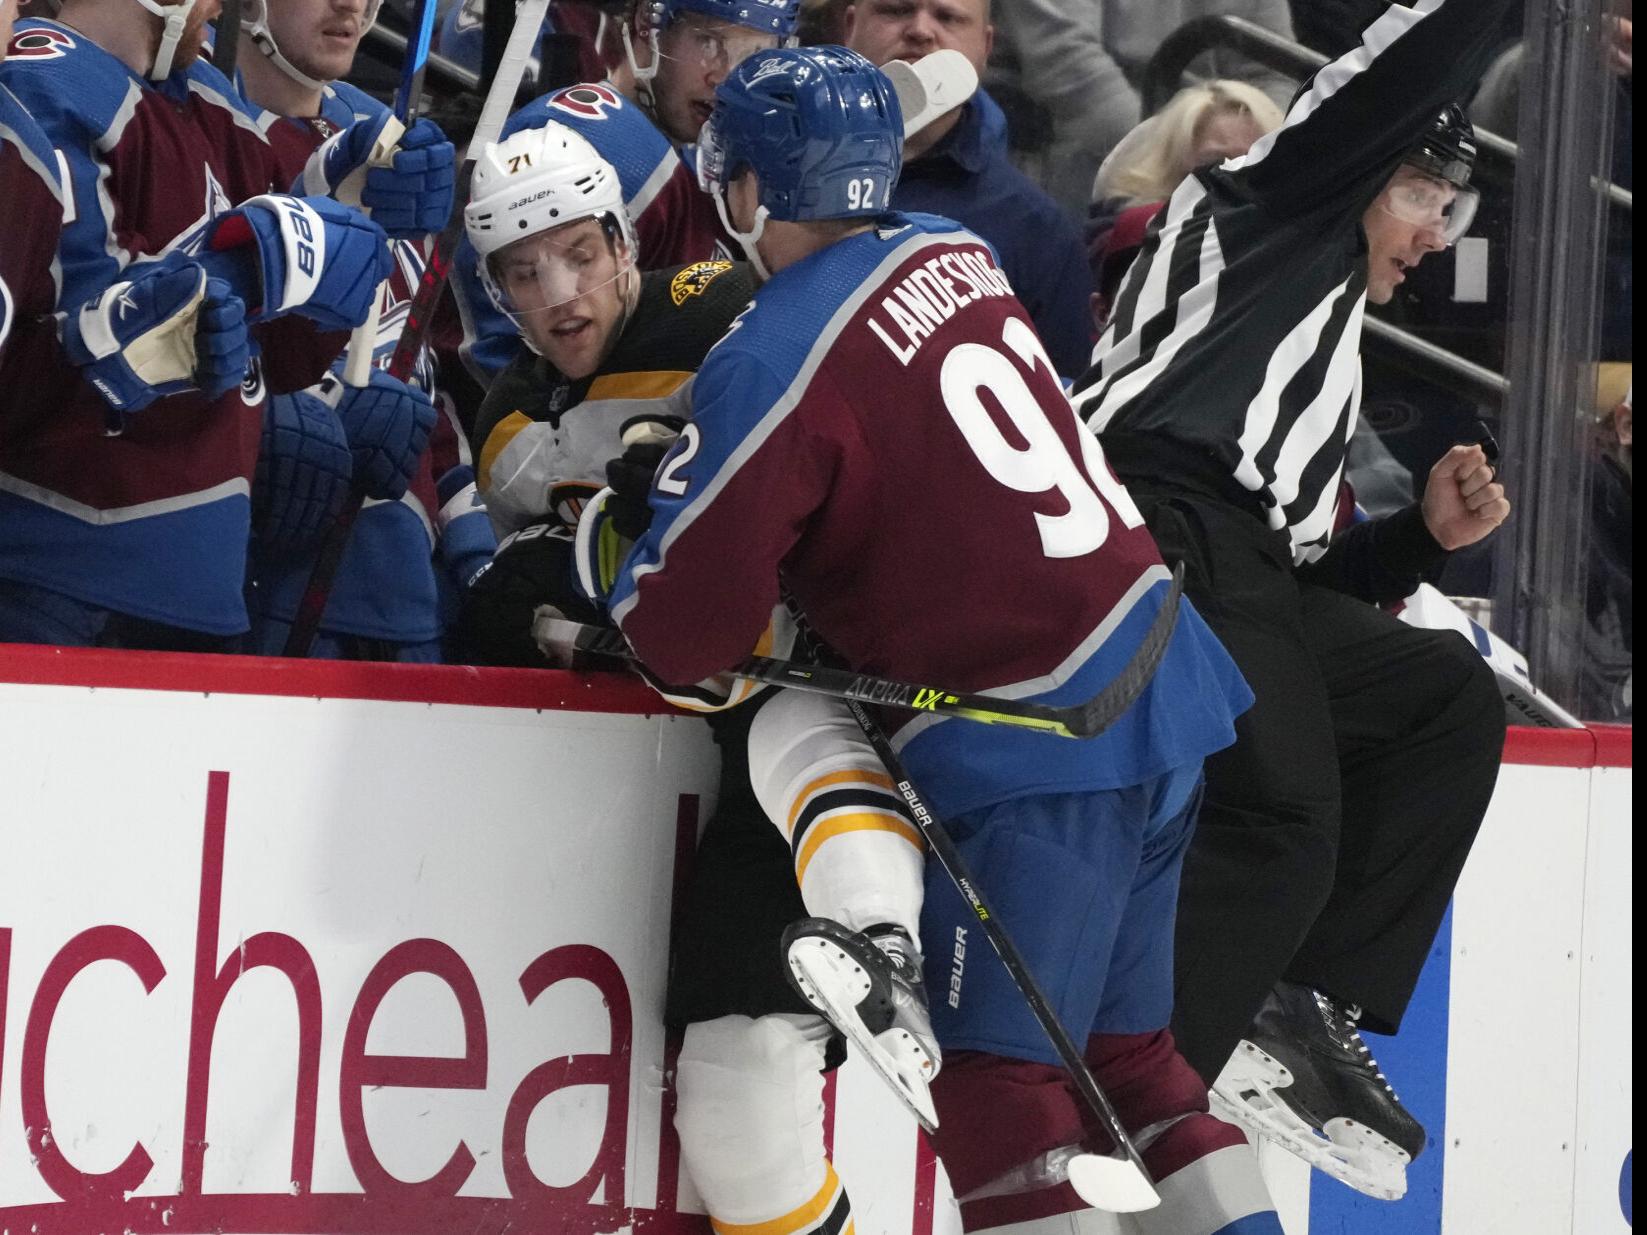 Colorado Avalanche: Meet the Players Recalled from the Colorado Eagles